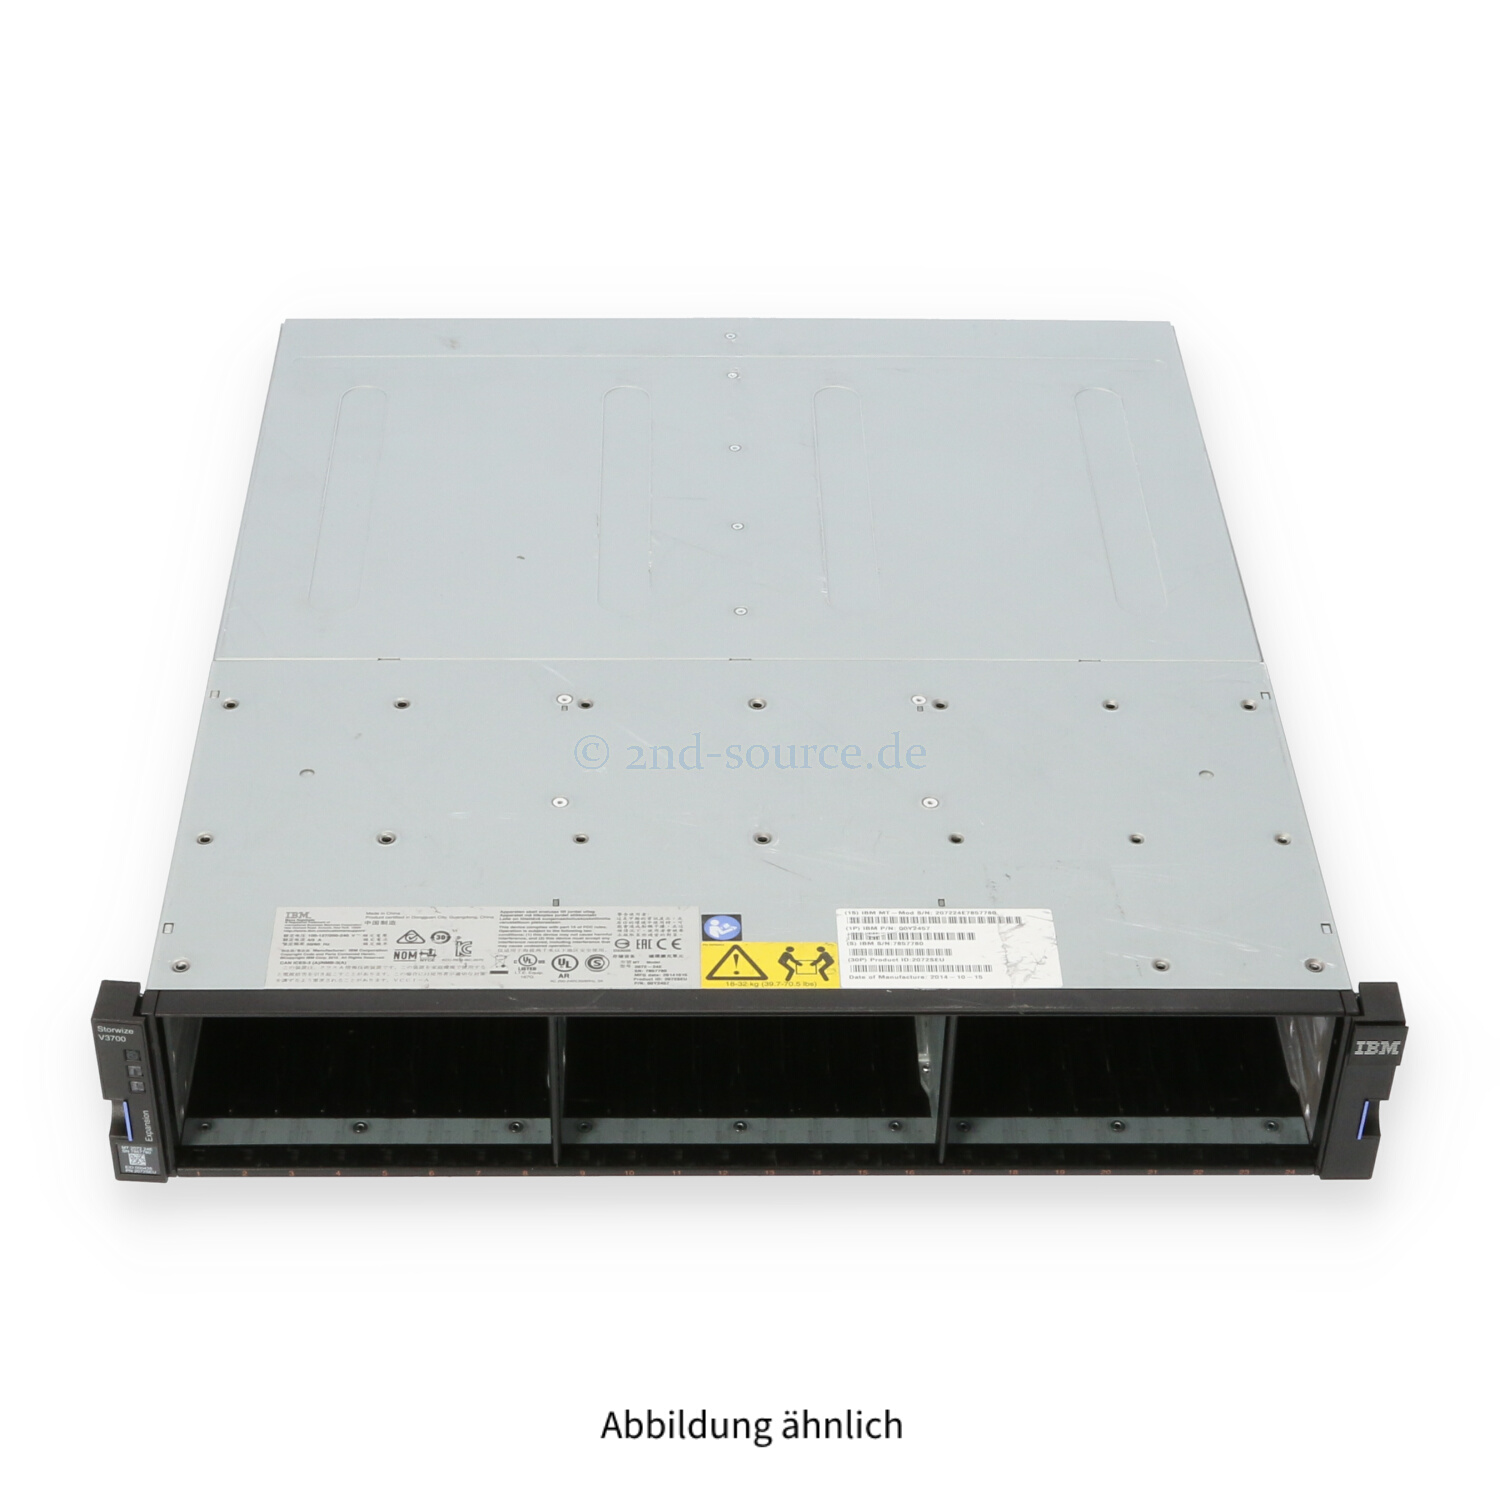 IBM Storwize V3700 24x 2.5'' SFF Expansion Enclosure Chassis 2072-24E 00Y2457